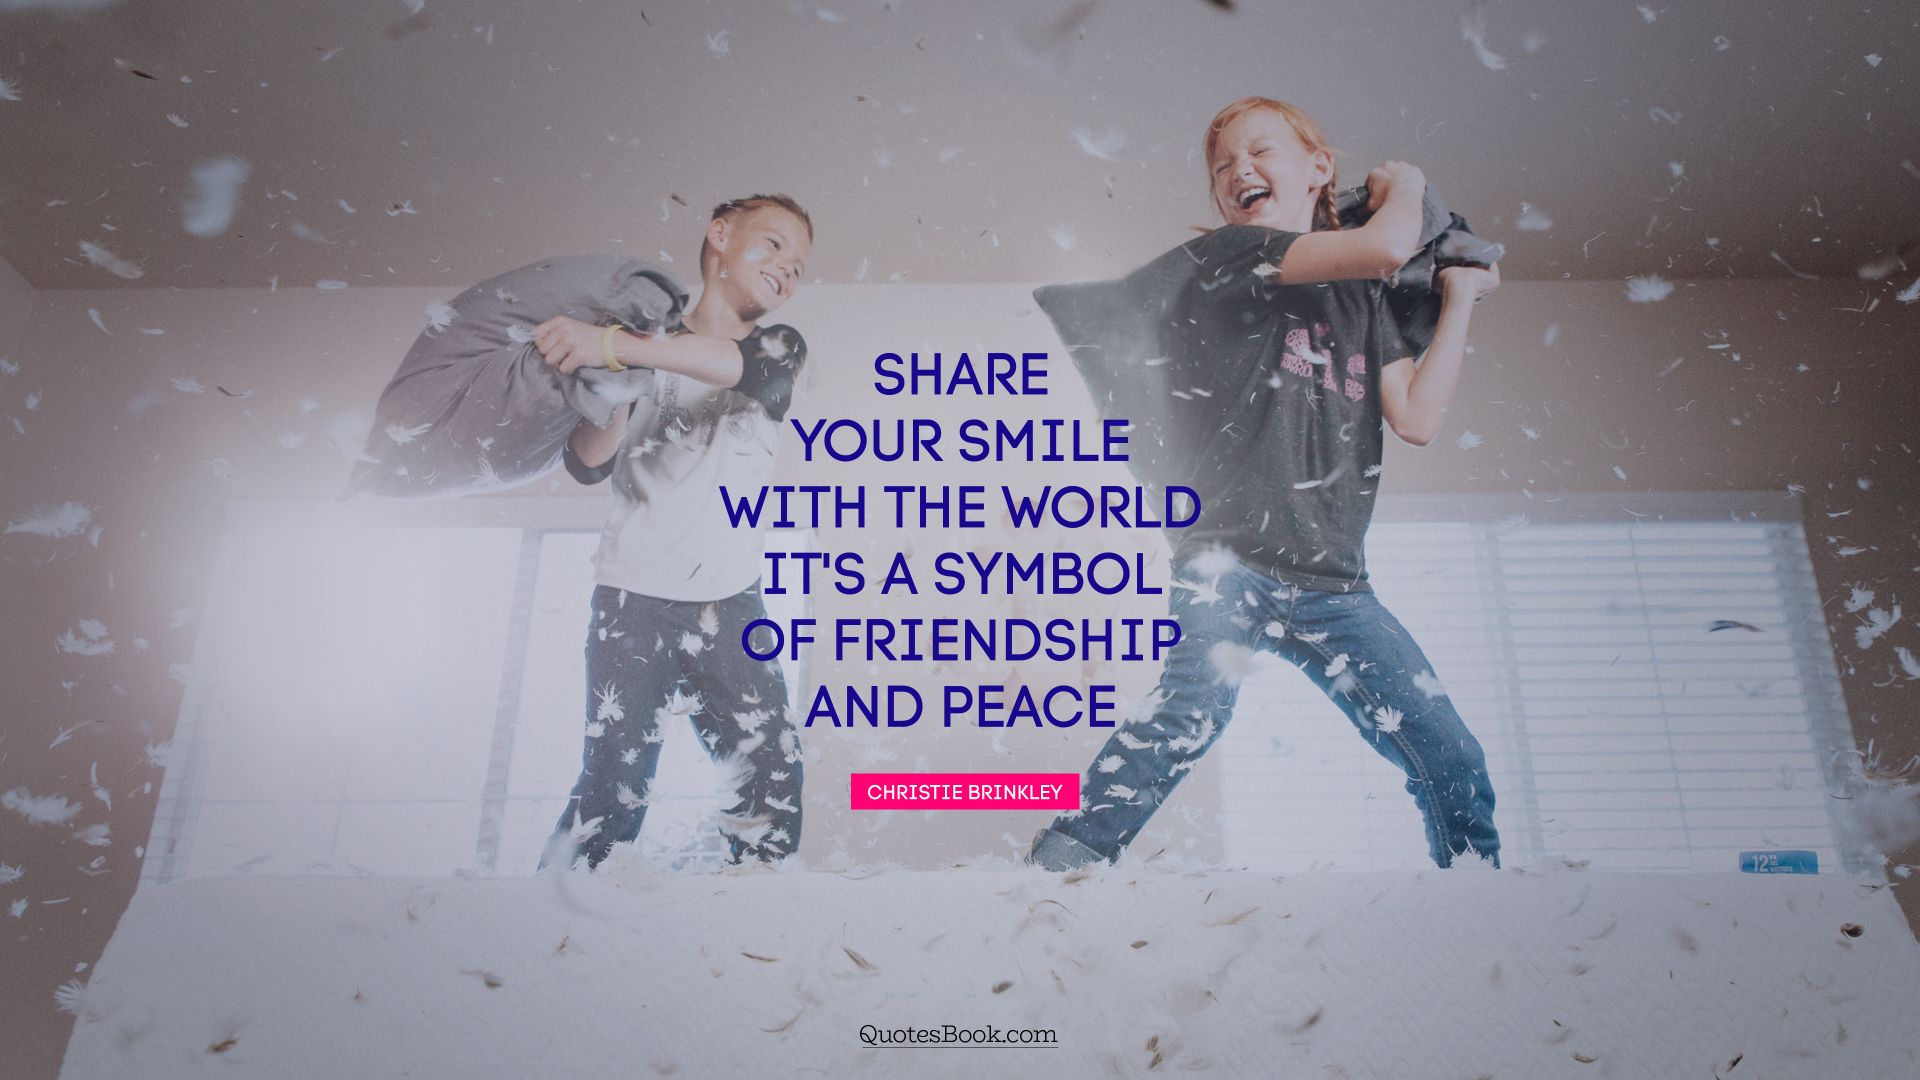 Share your smile with the world. It's a symbol of friendship and peace. - Quote by Christie Brinkley